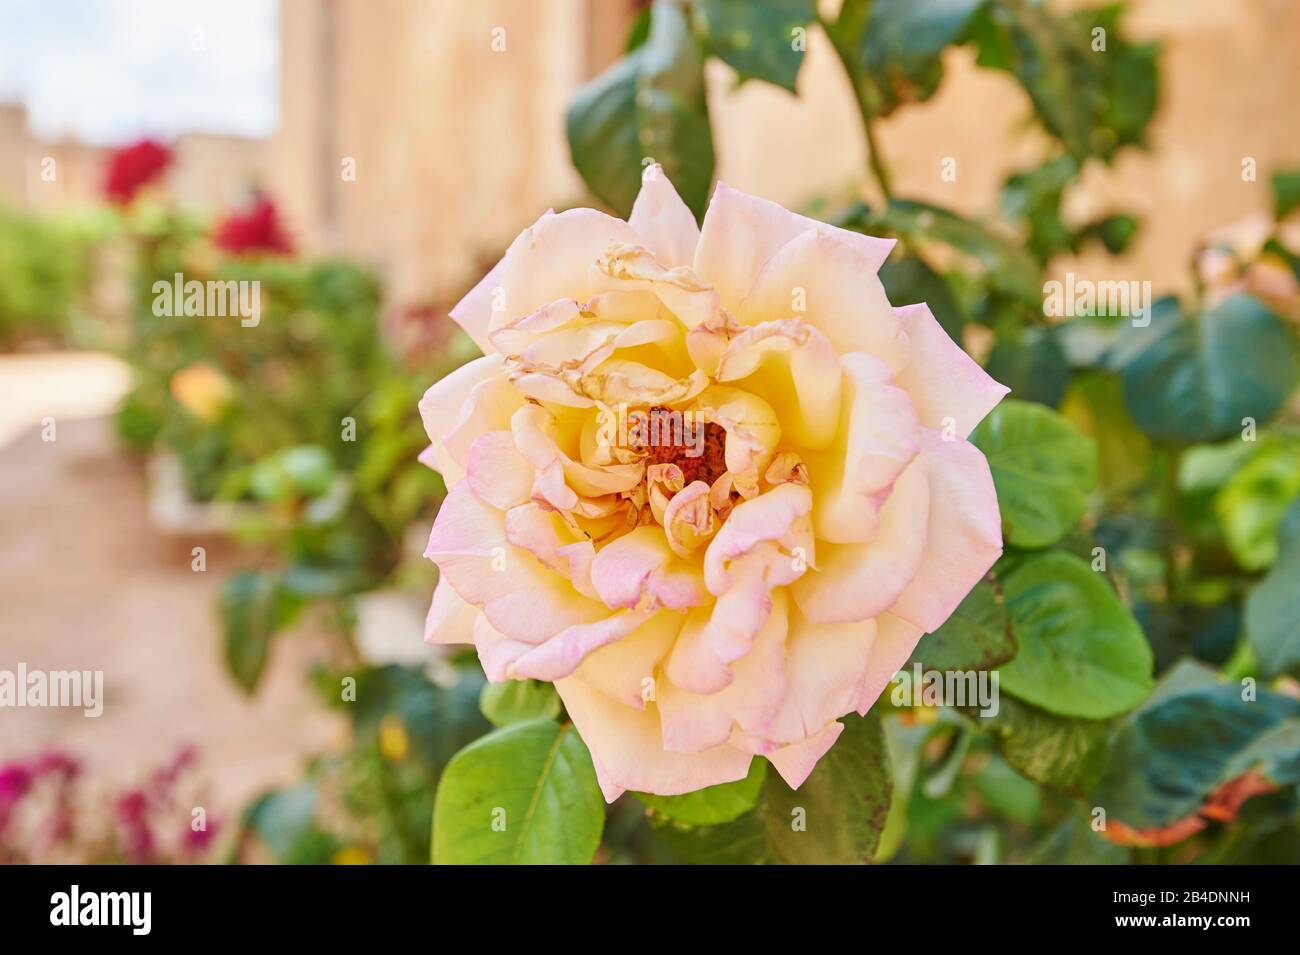 Pink cultivated rose, pink, garden rose, blossom, flower, Crete, Greece Stock Photo